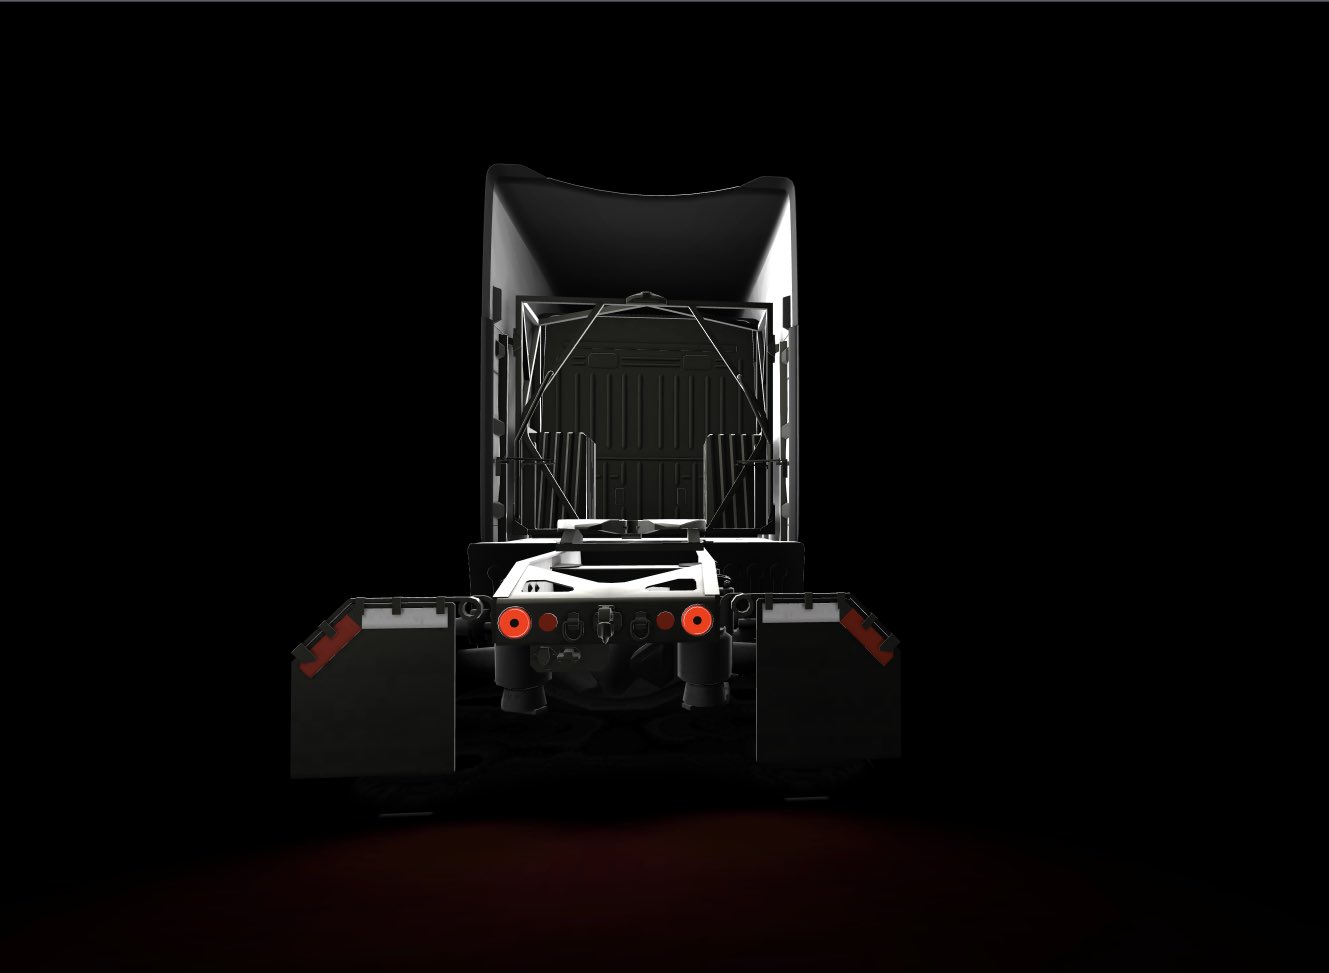 Tesla has added 3D models of the Tesla Semi to their app